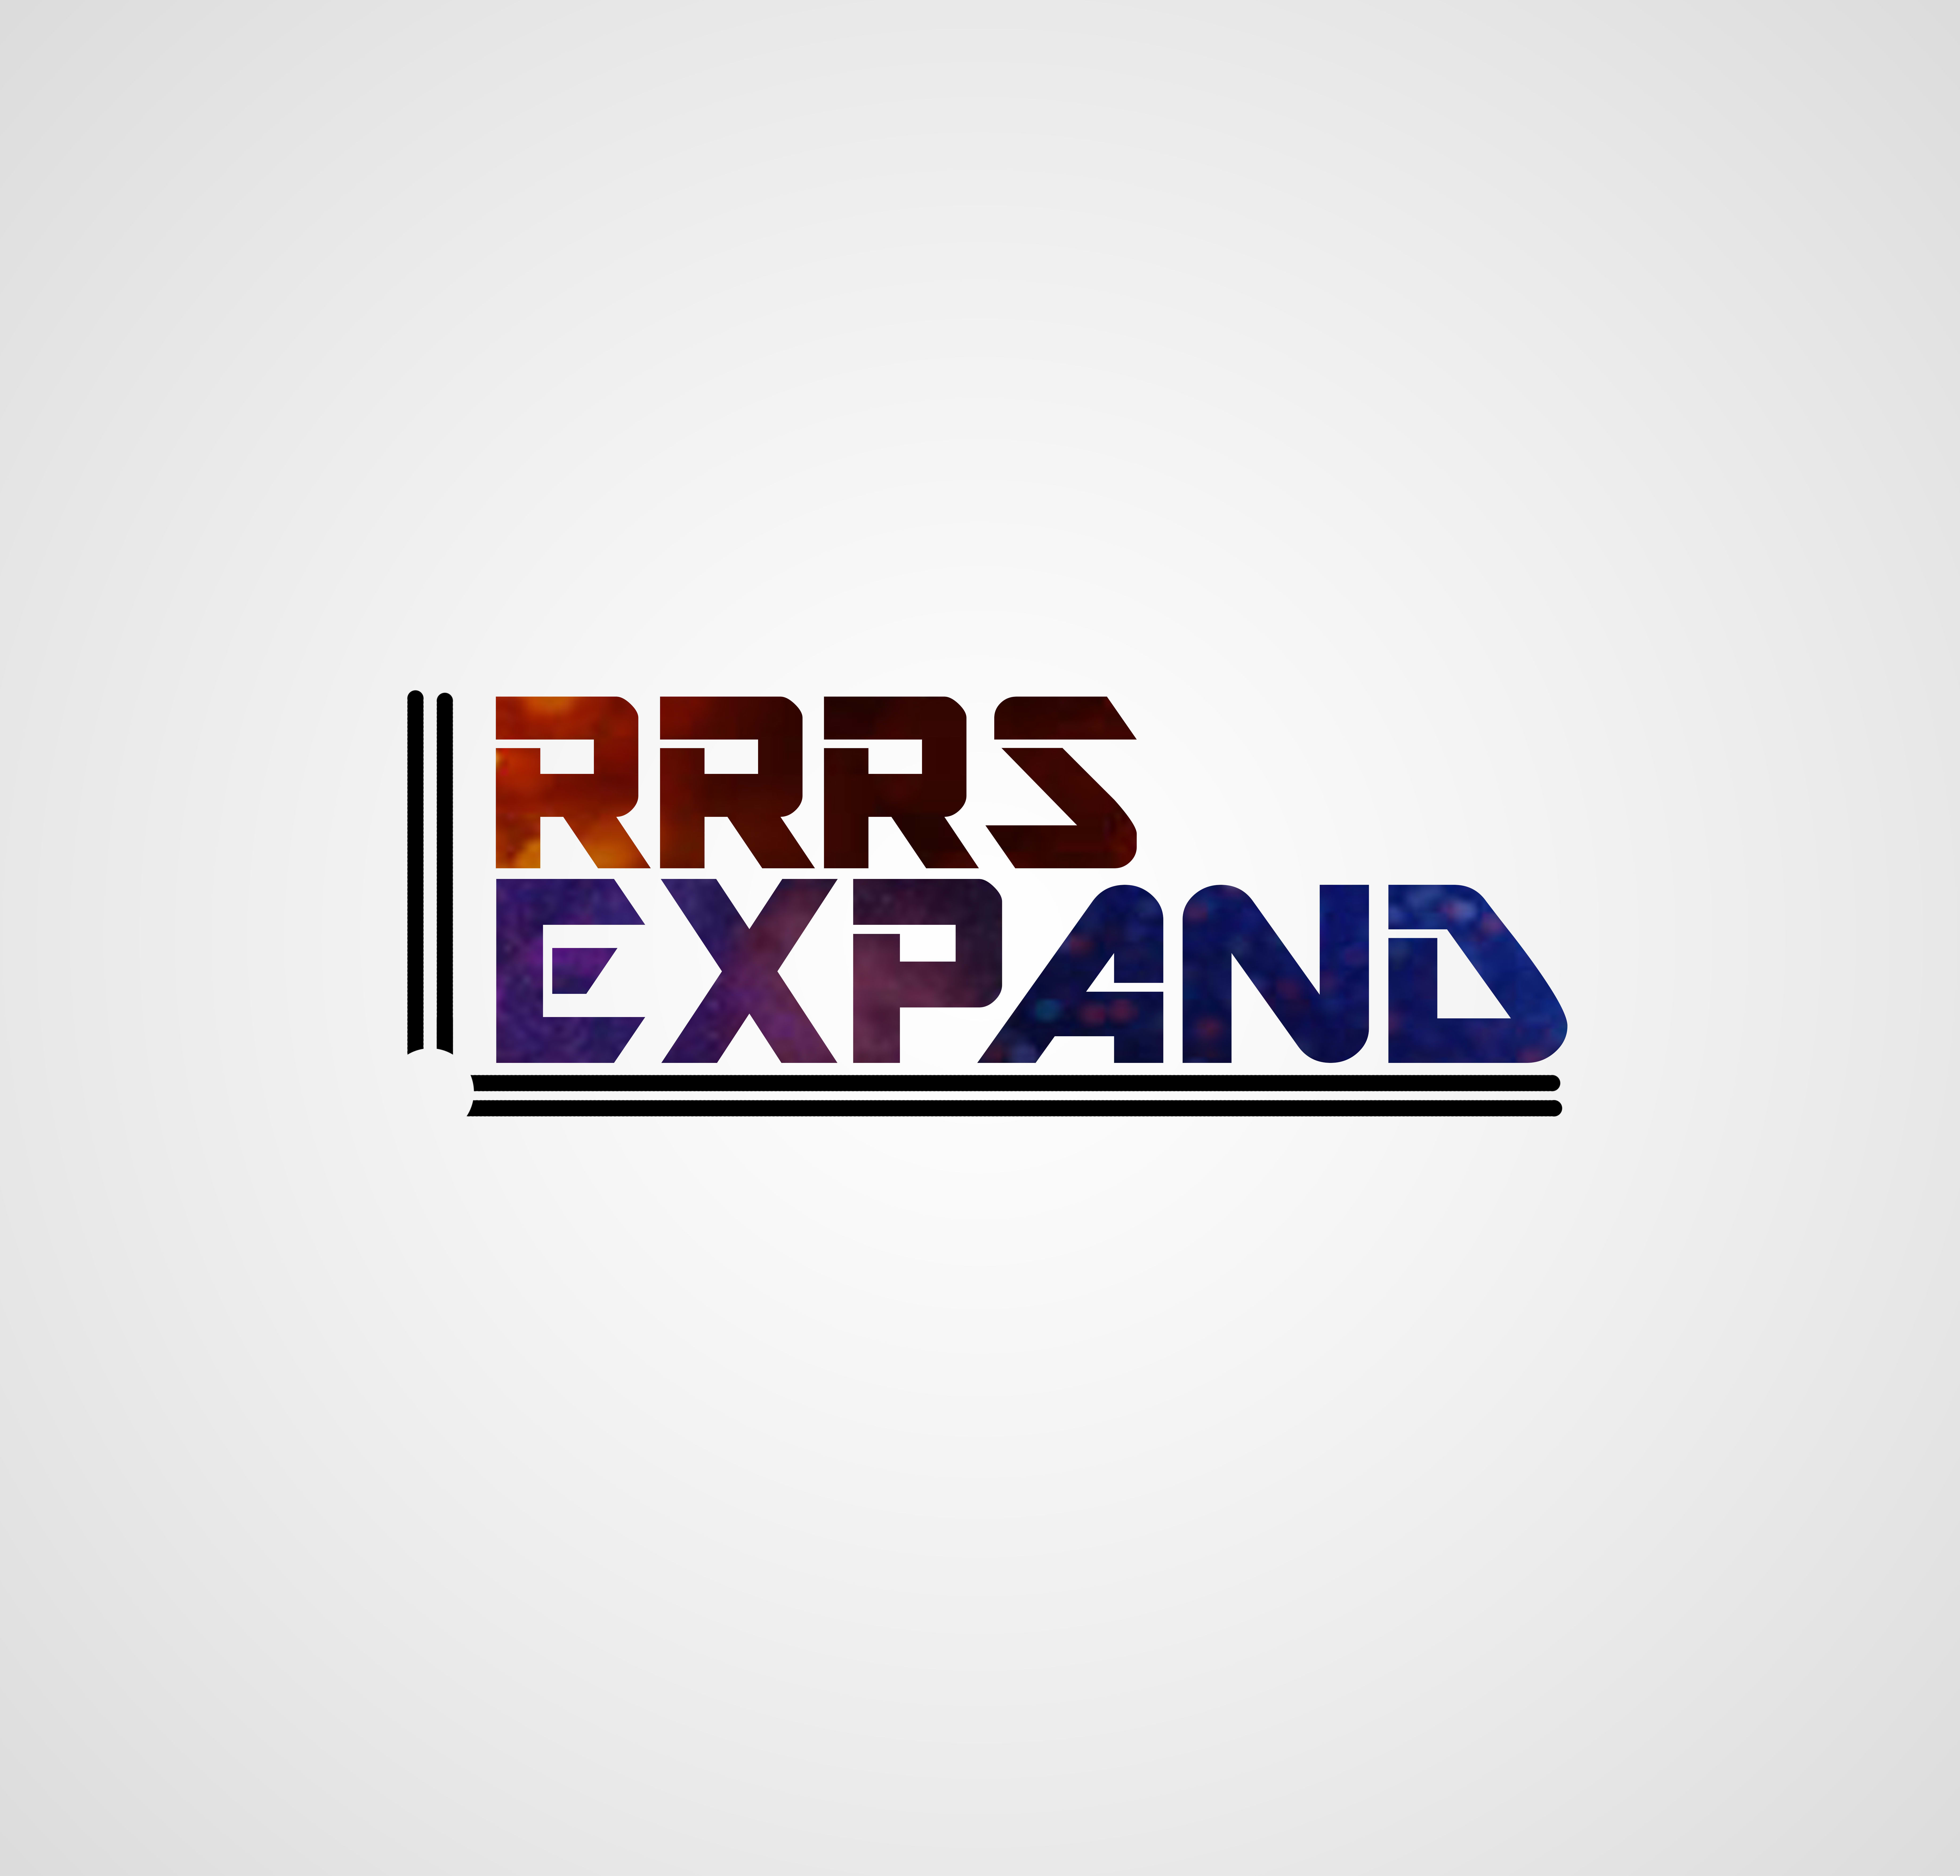 RRRS Expand Industries Private Limited